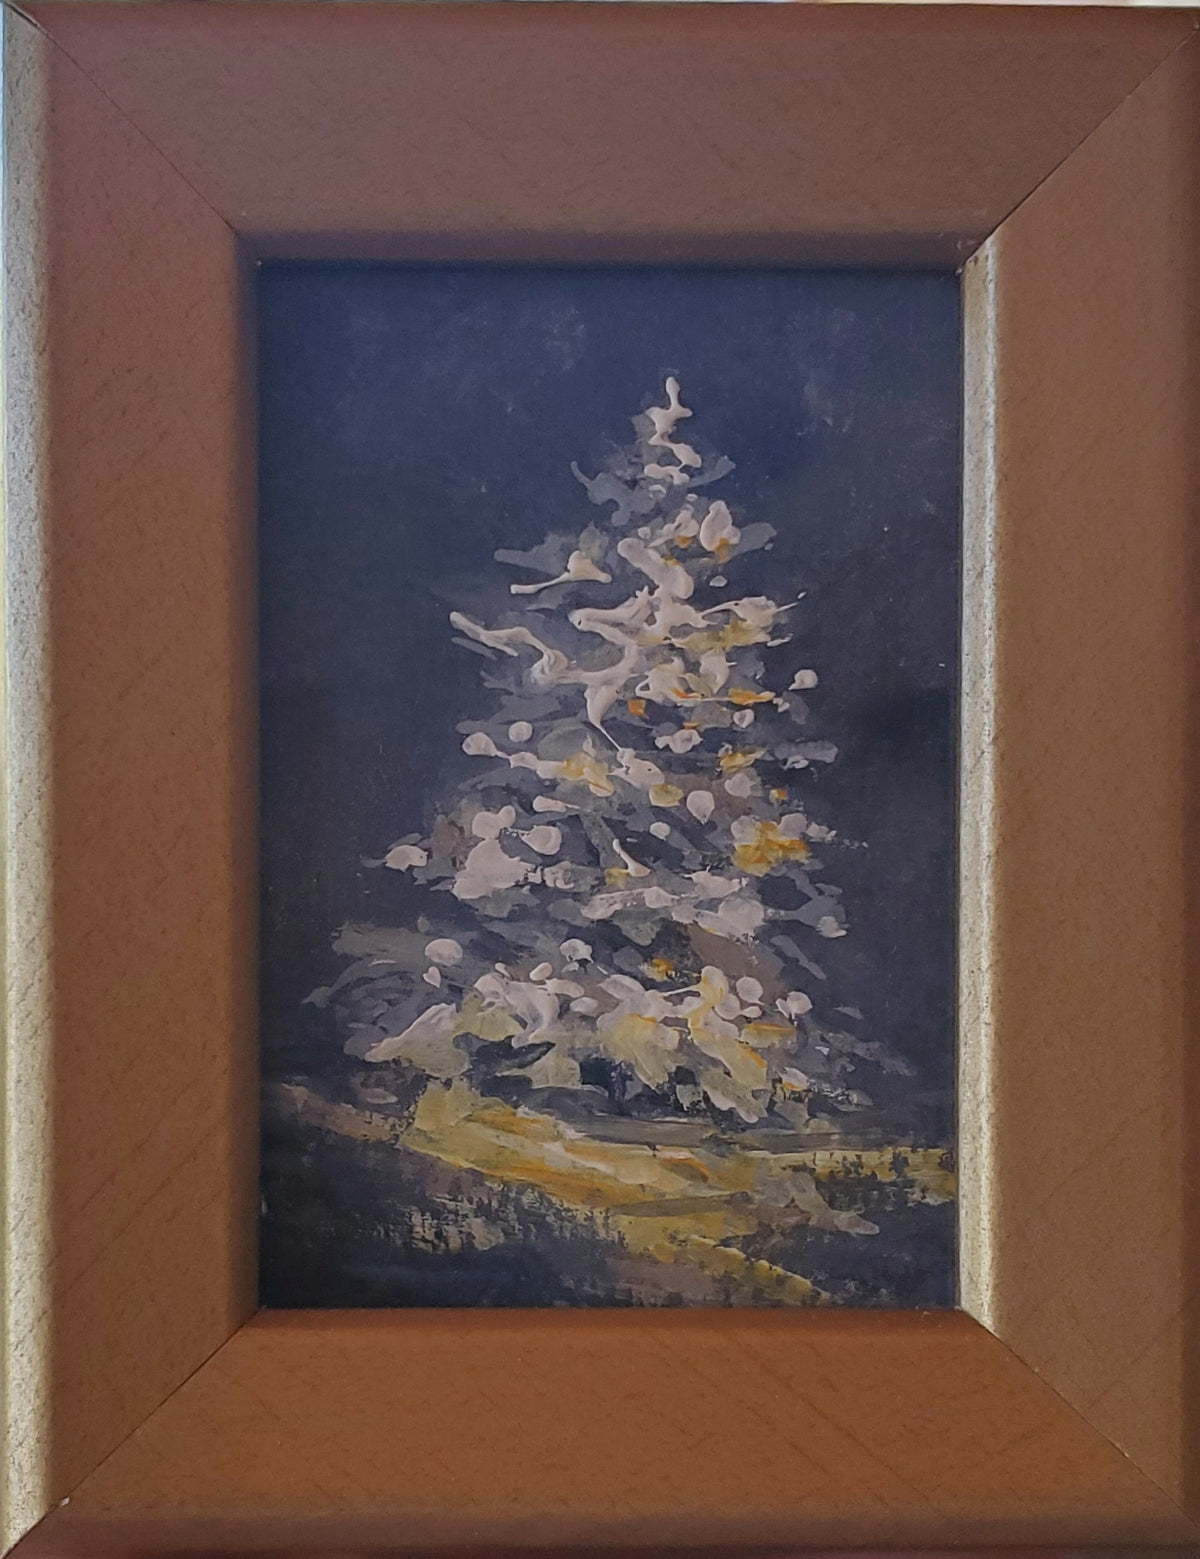 "Christmas Tree at Night" by Selena Doolittle McColley - Gouache